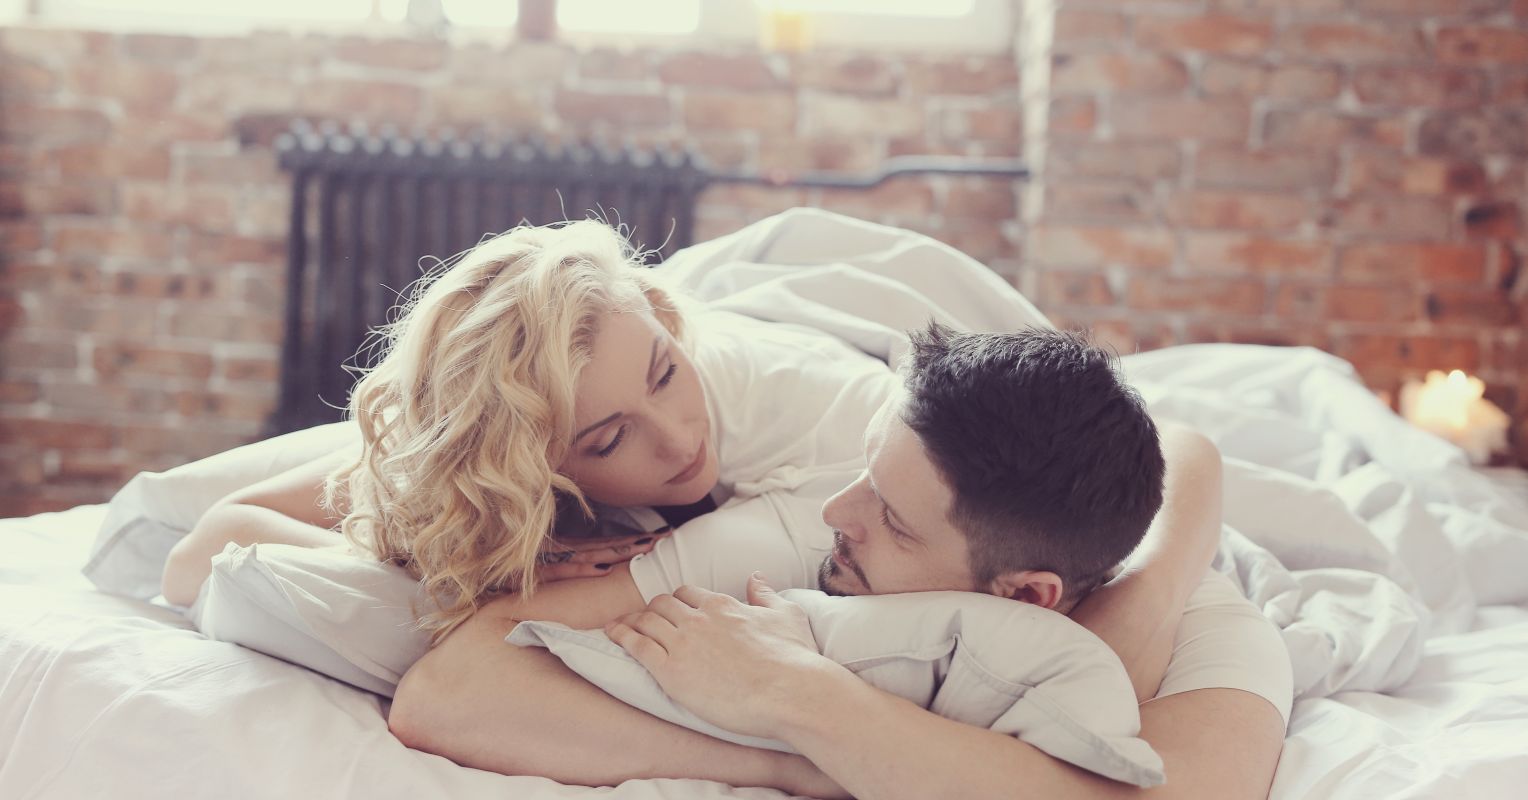 How Many Sex Partners Does It Really Take to Be Happy? Psychology Today